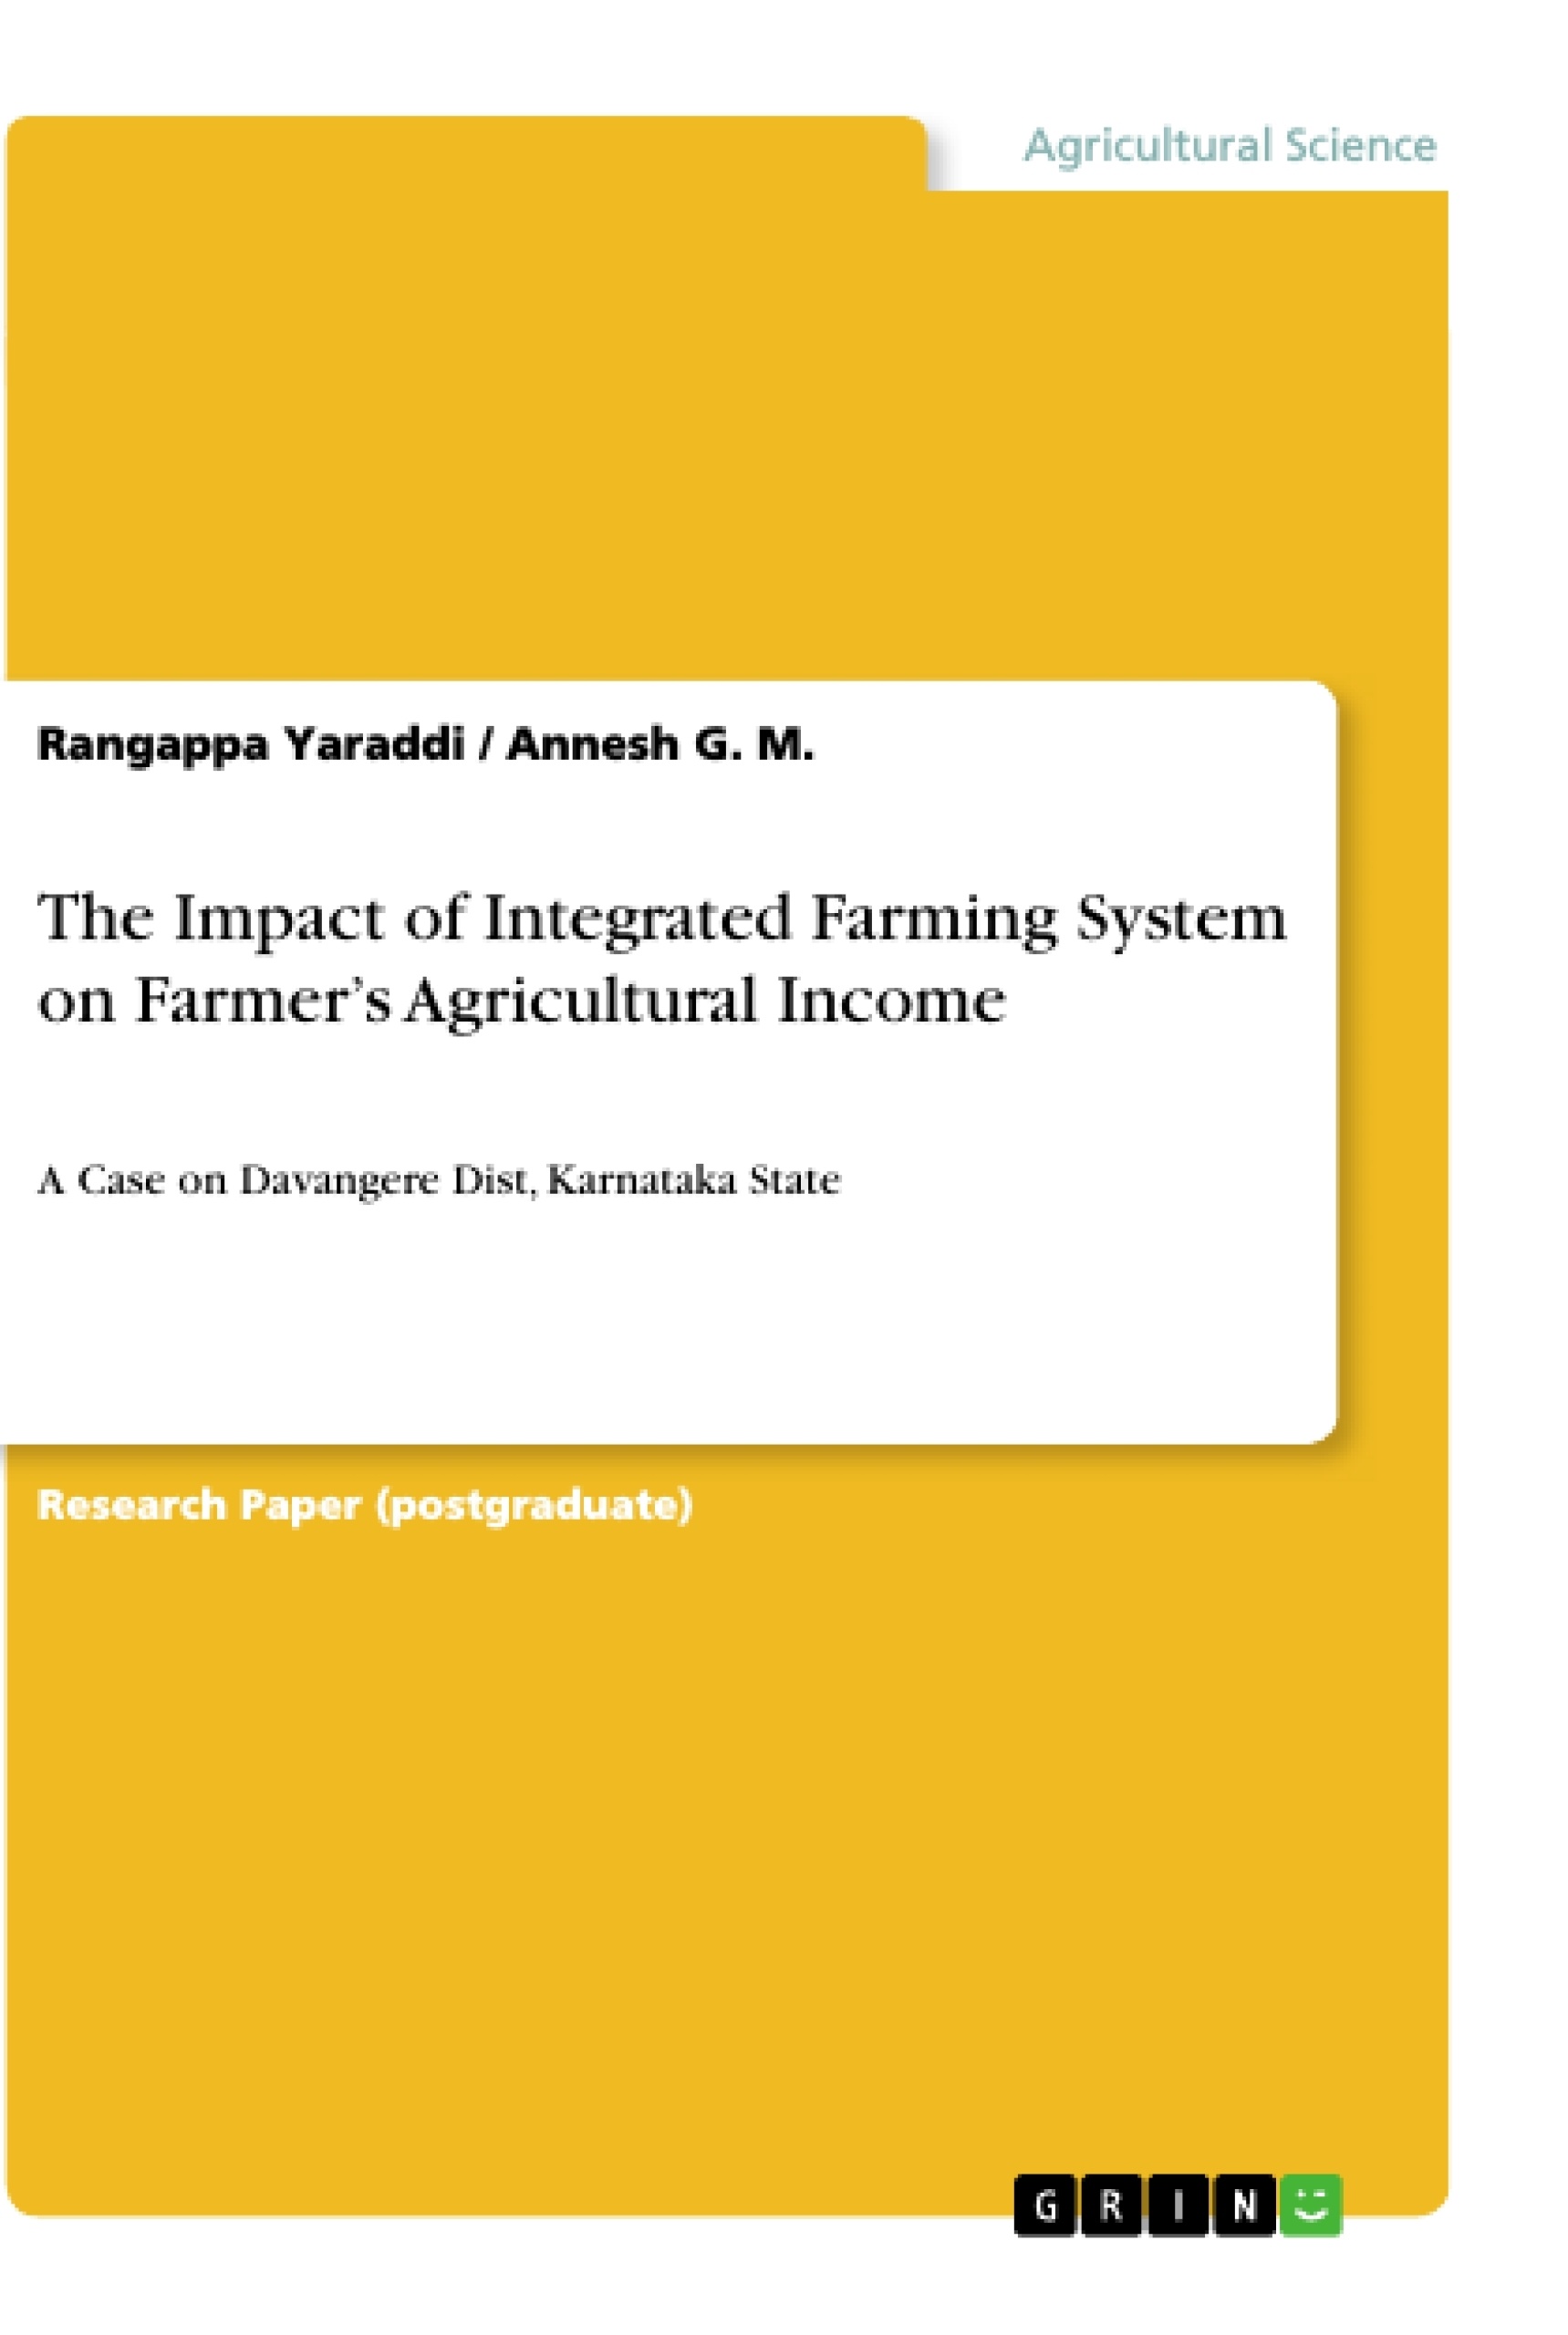 Título: The Impact of Integrated Farming System on Farmer’s Agricultural Income